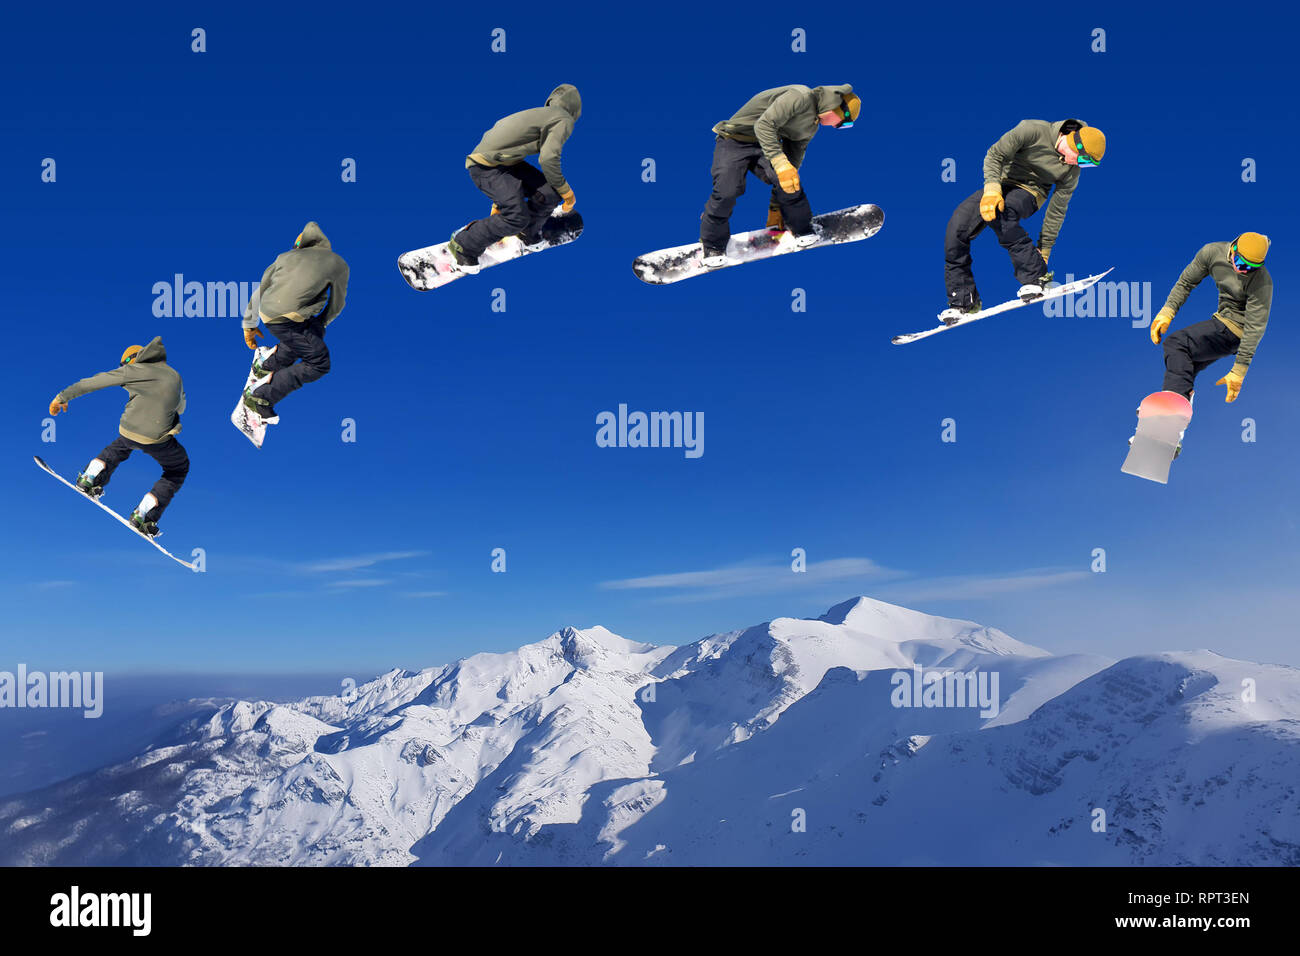 Snowboarding Snowboard Snowboarder at jump mountains at sunny day Stock Photo